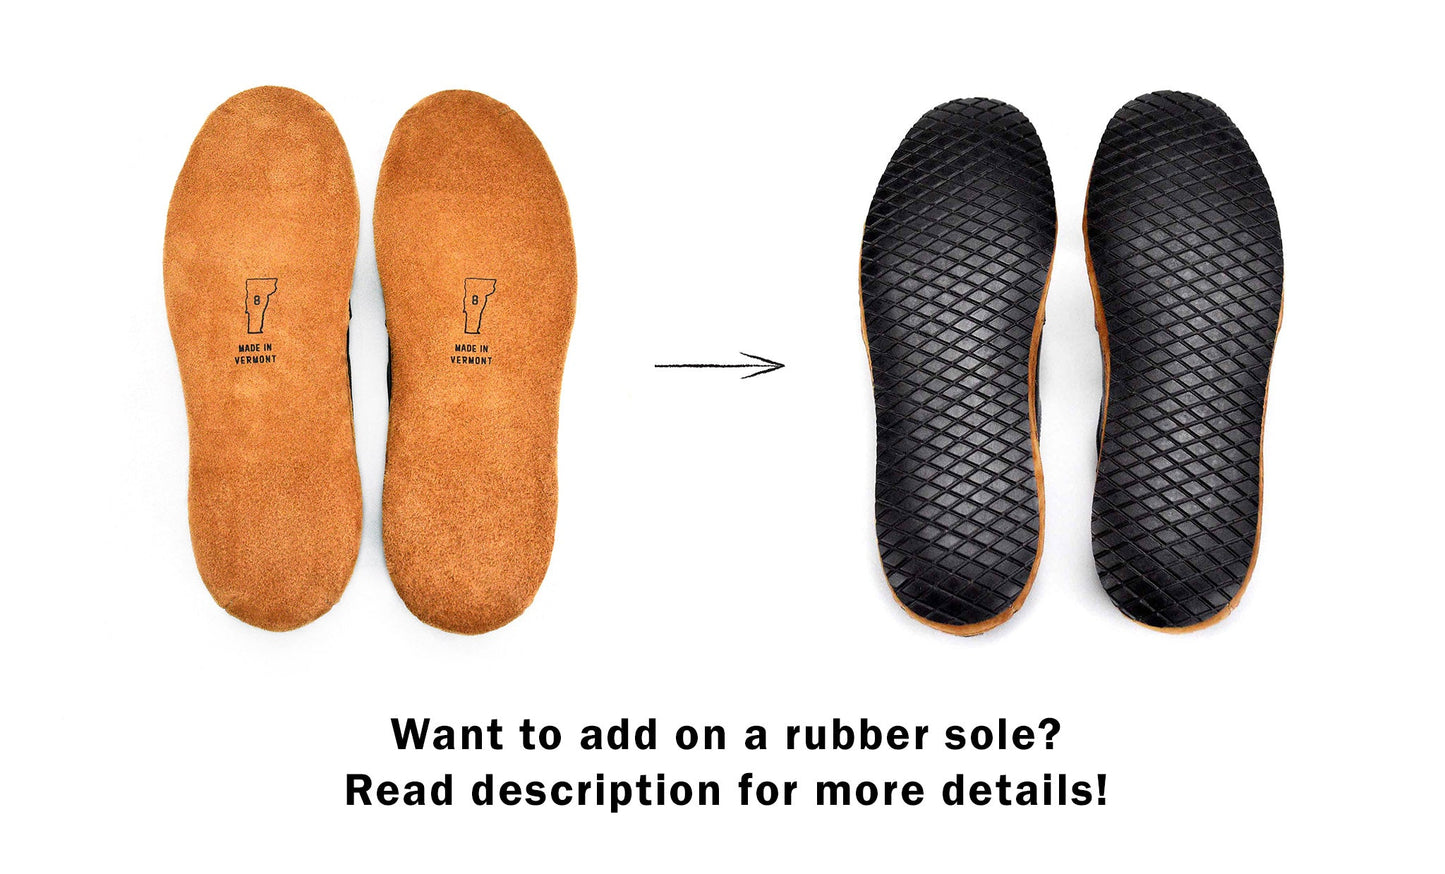 Sole with and without rubber